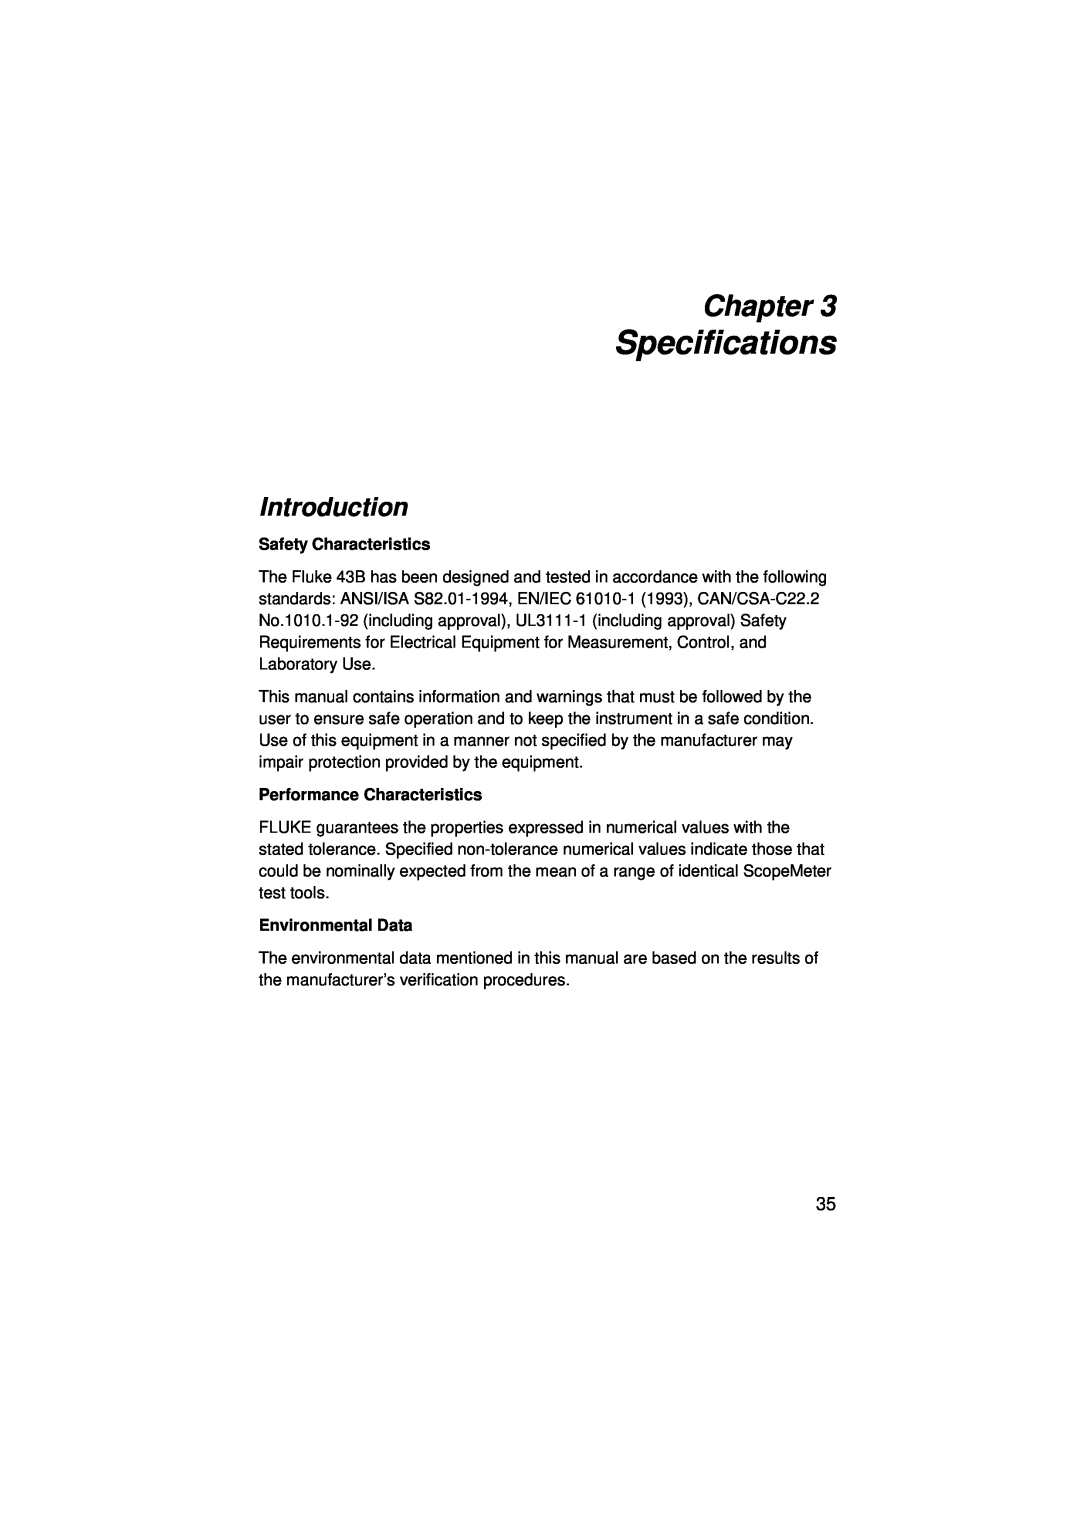 Fluke 43B user manual Specifications, Introduction, Chapter 